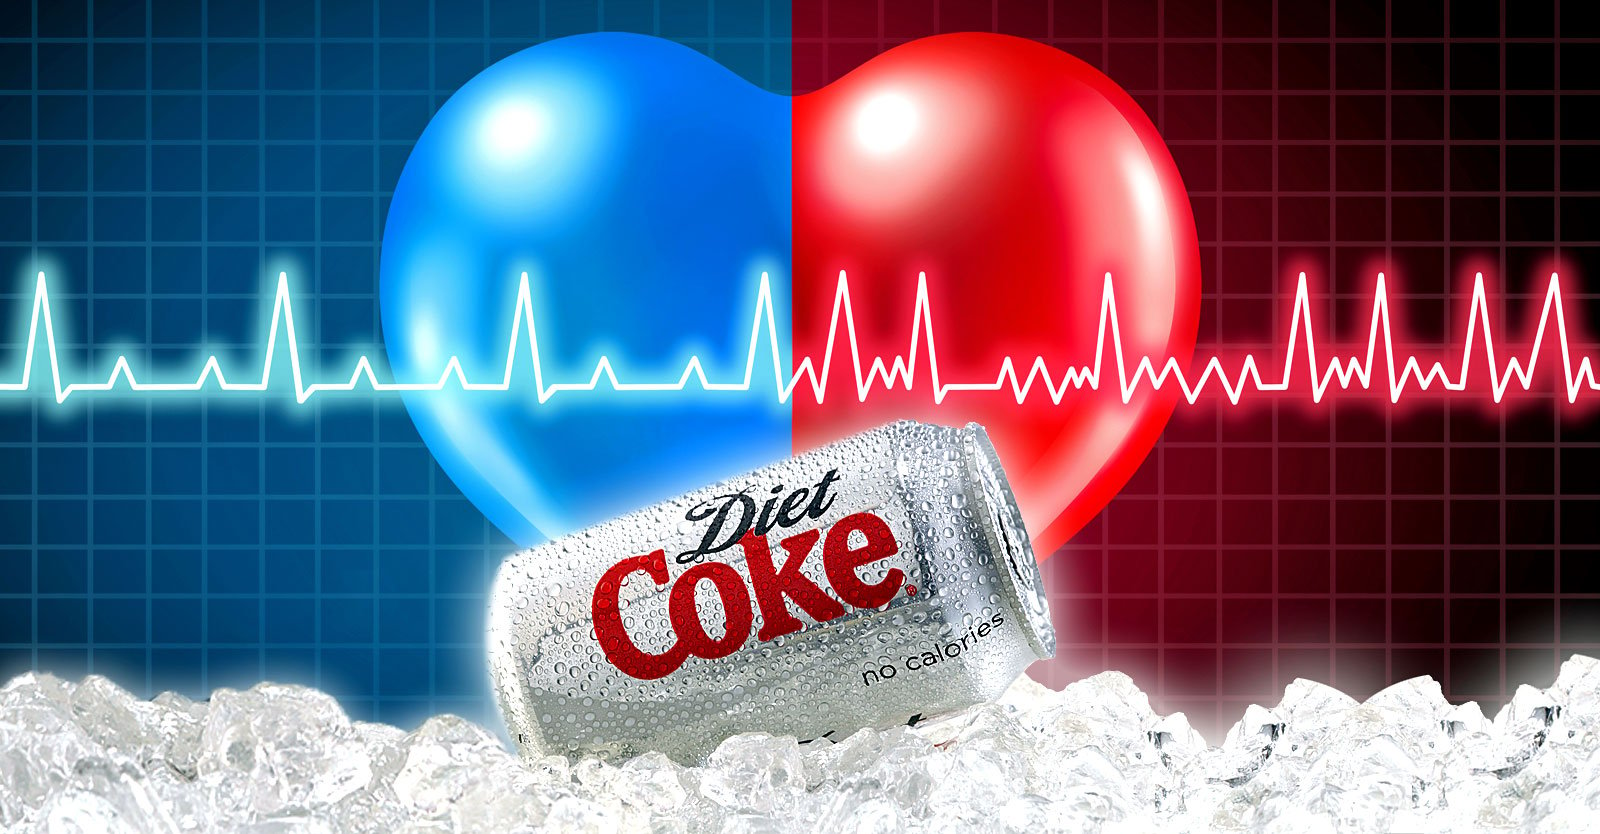 Artificially Sweetened Drinks Linked To Serious Heart Condition - CDM - Human Reporters • Not Machines